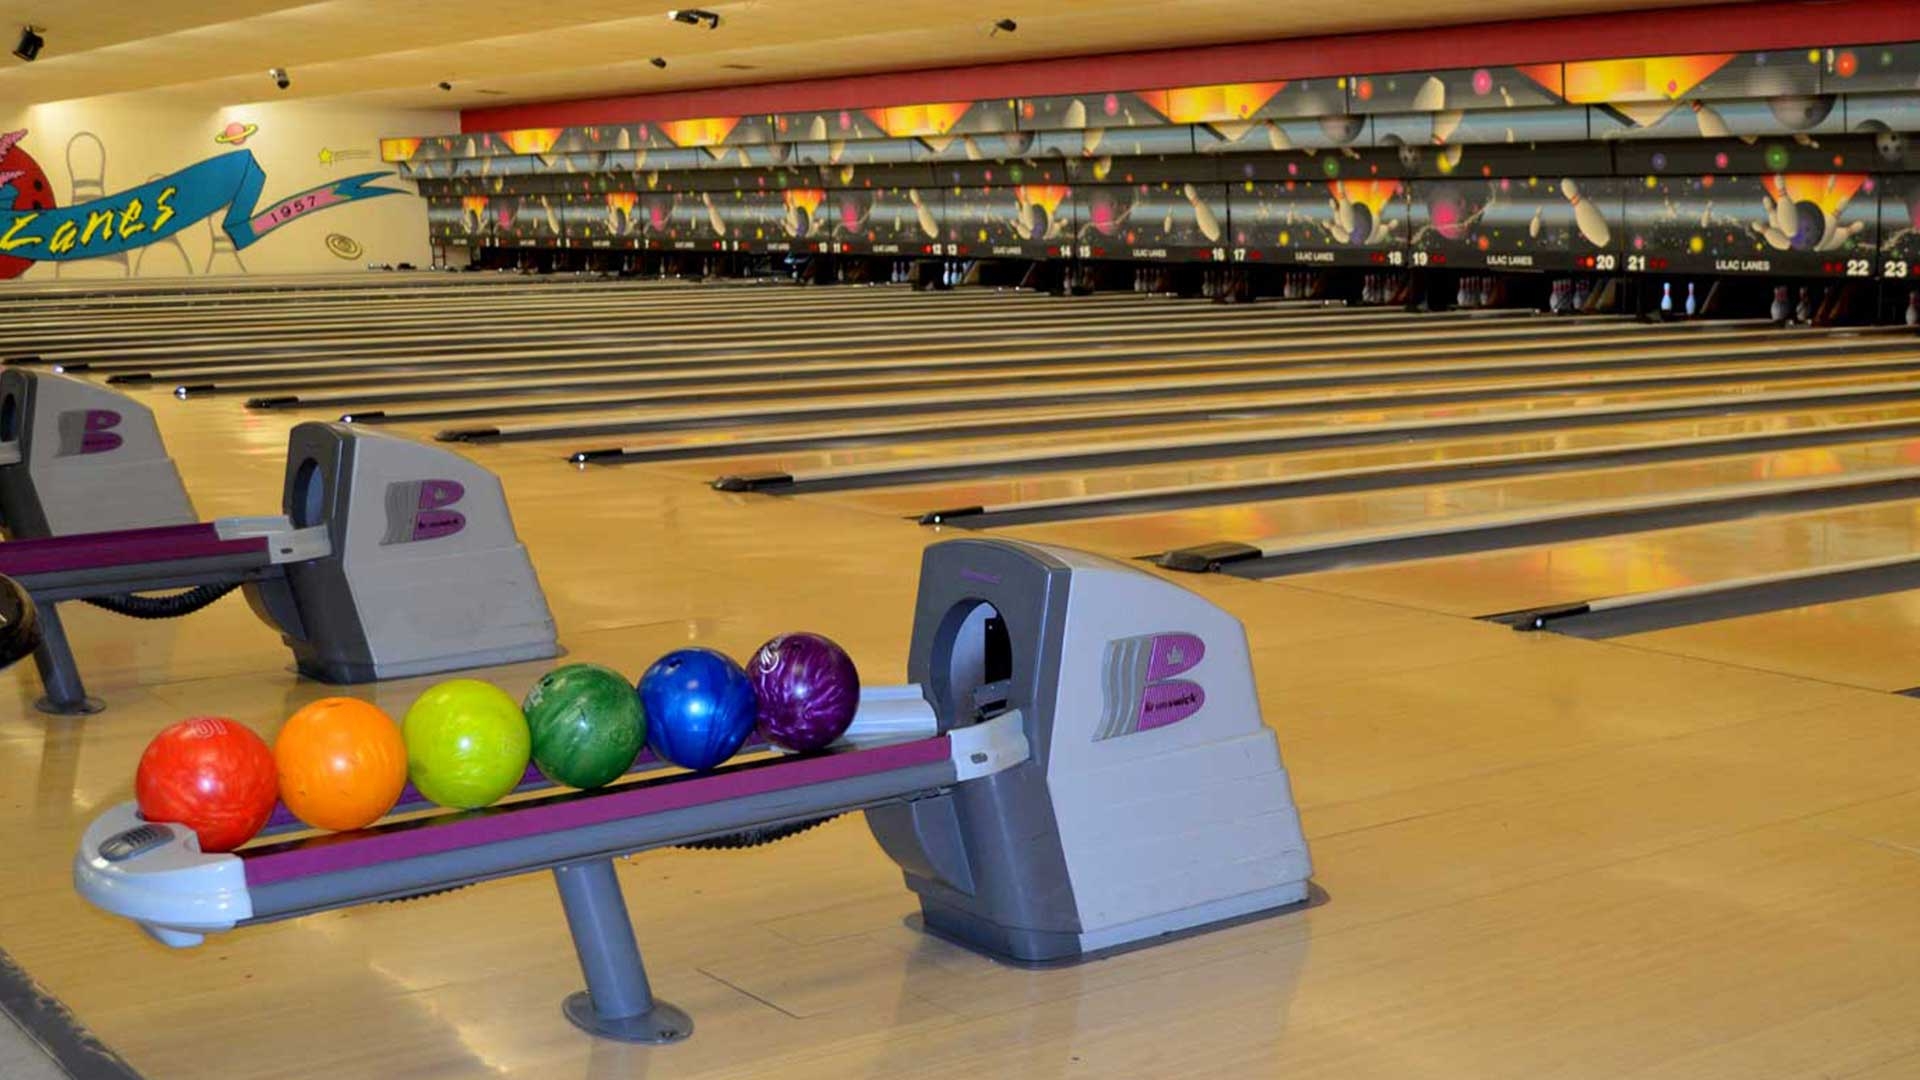 Indesign International | Bowling Lanes Alley in India | 4D theatres ...